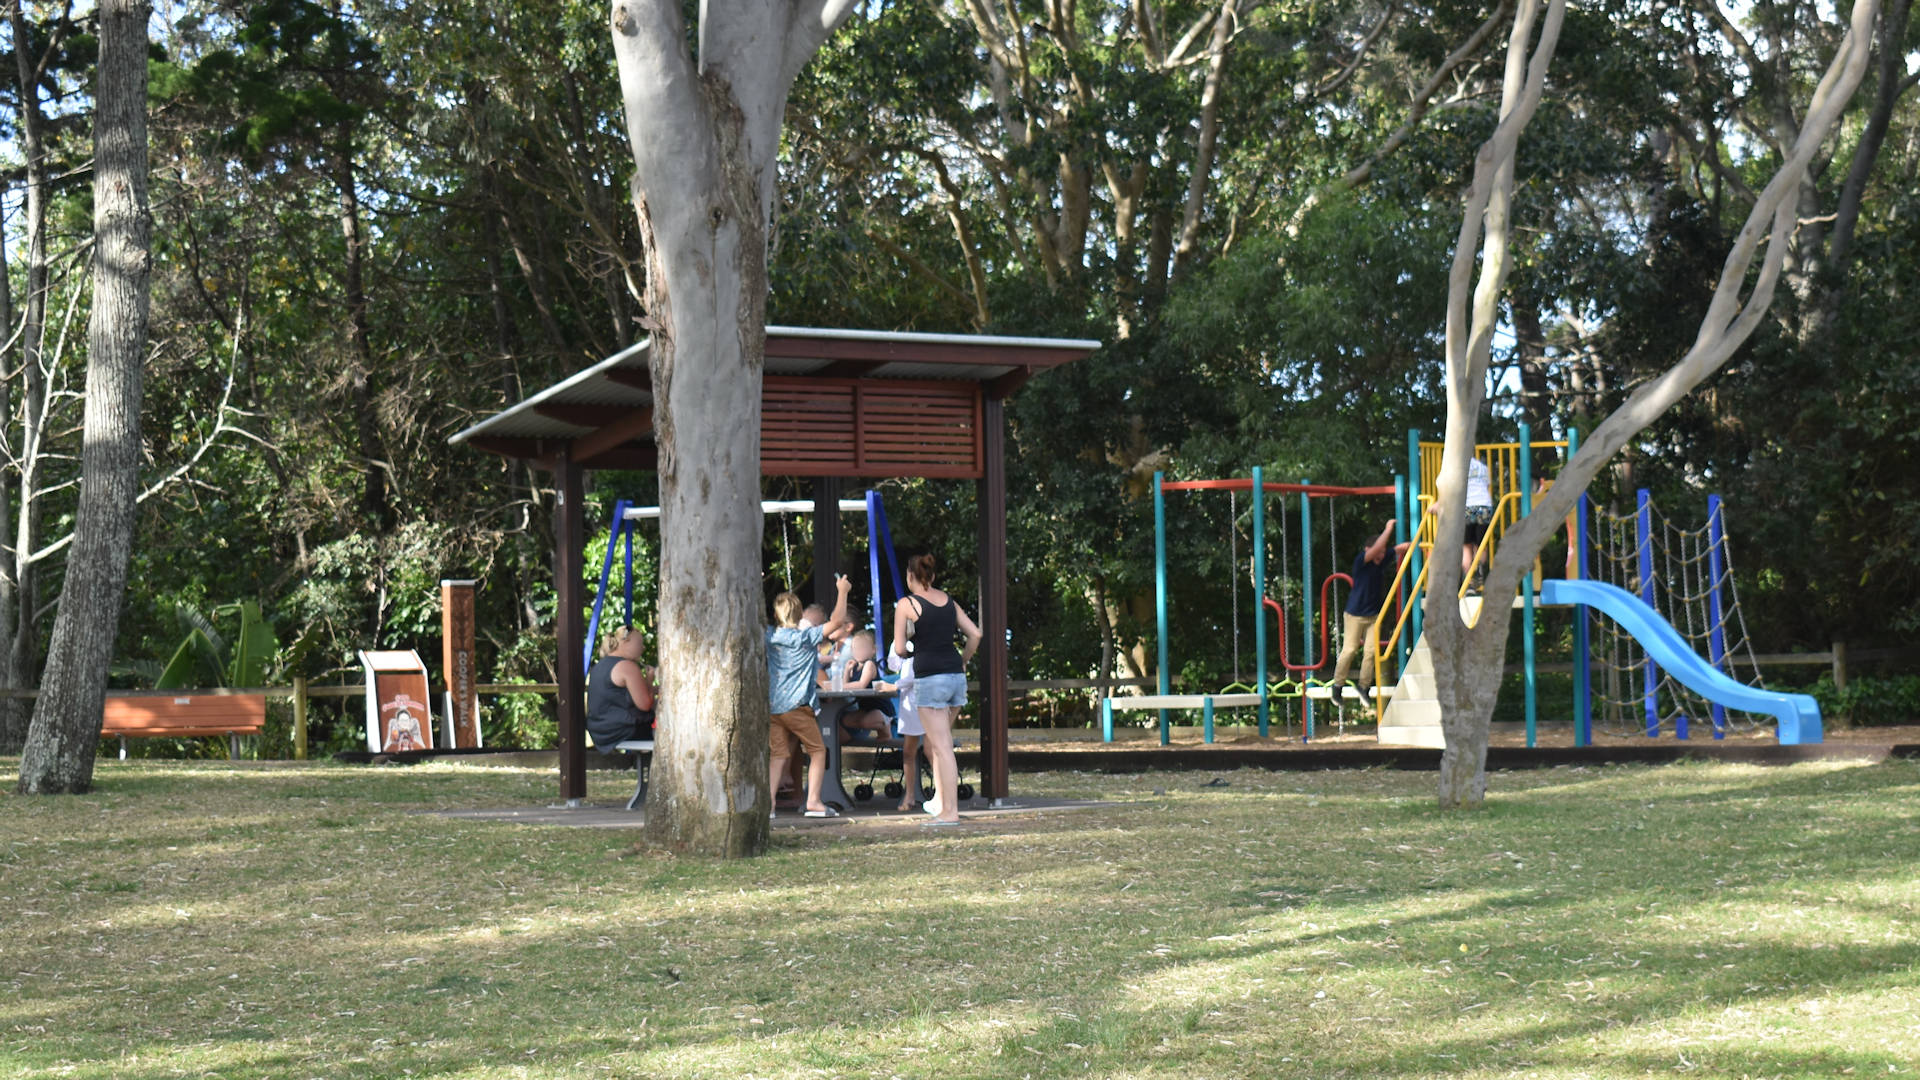 Green park with tall gumtrees, sheltered picnic area, and playground, taken at Nielsen Park in Hervey Bay